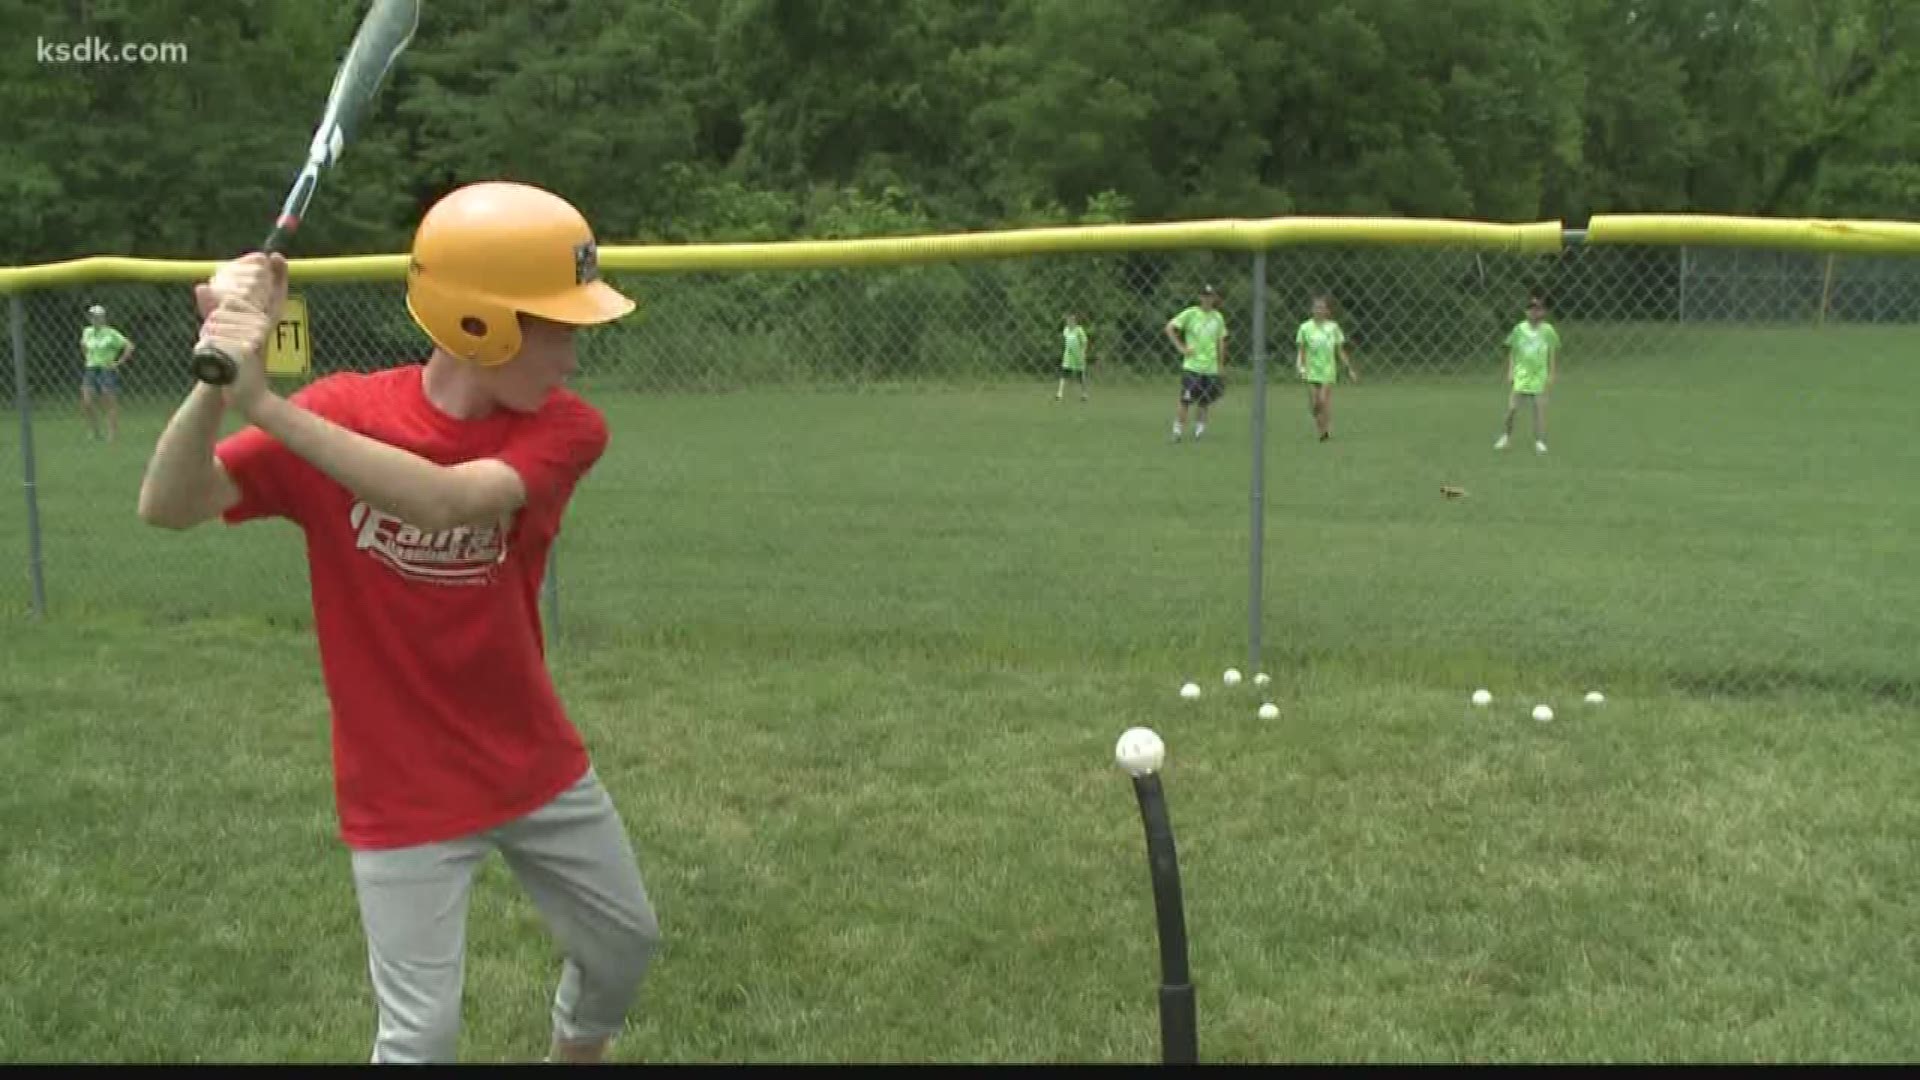 The Mike Bush Fantasy Baseball Camp for kids who are deaf or hard of hearing is now in it's 29th year.